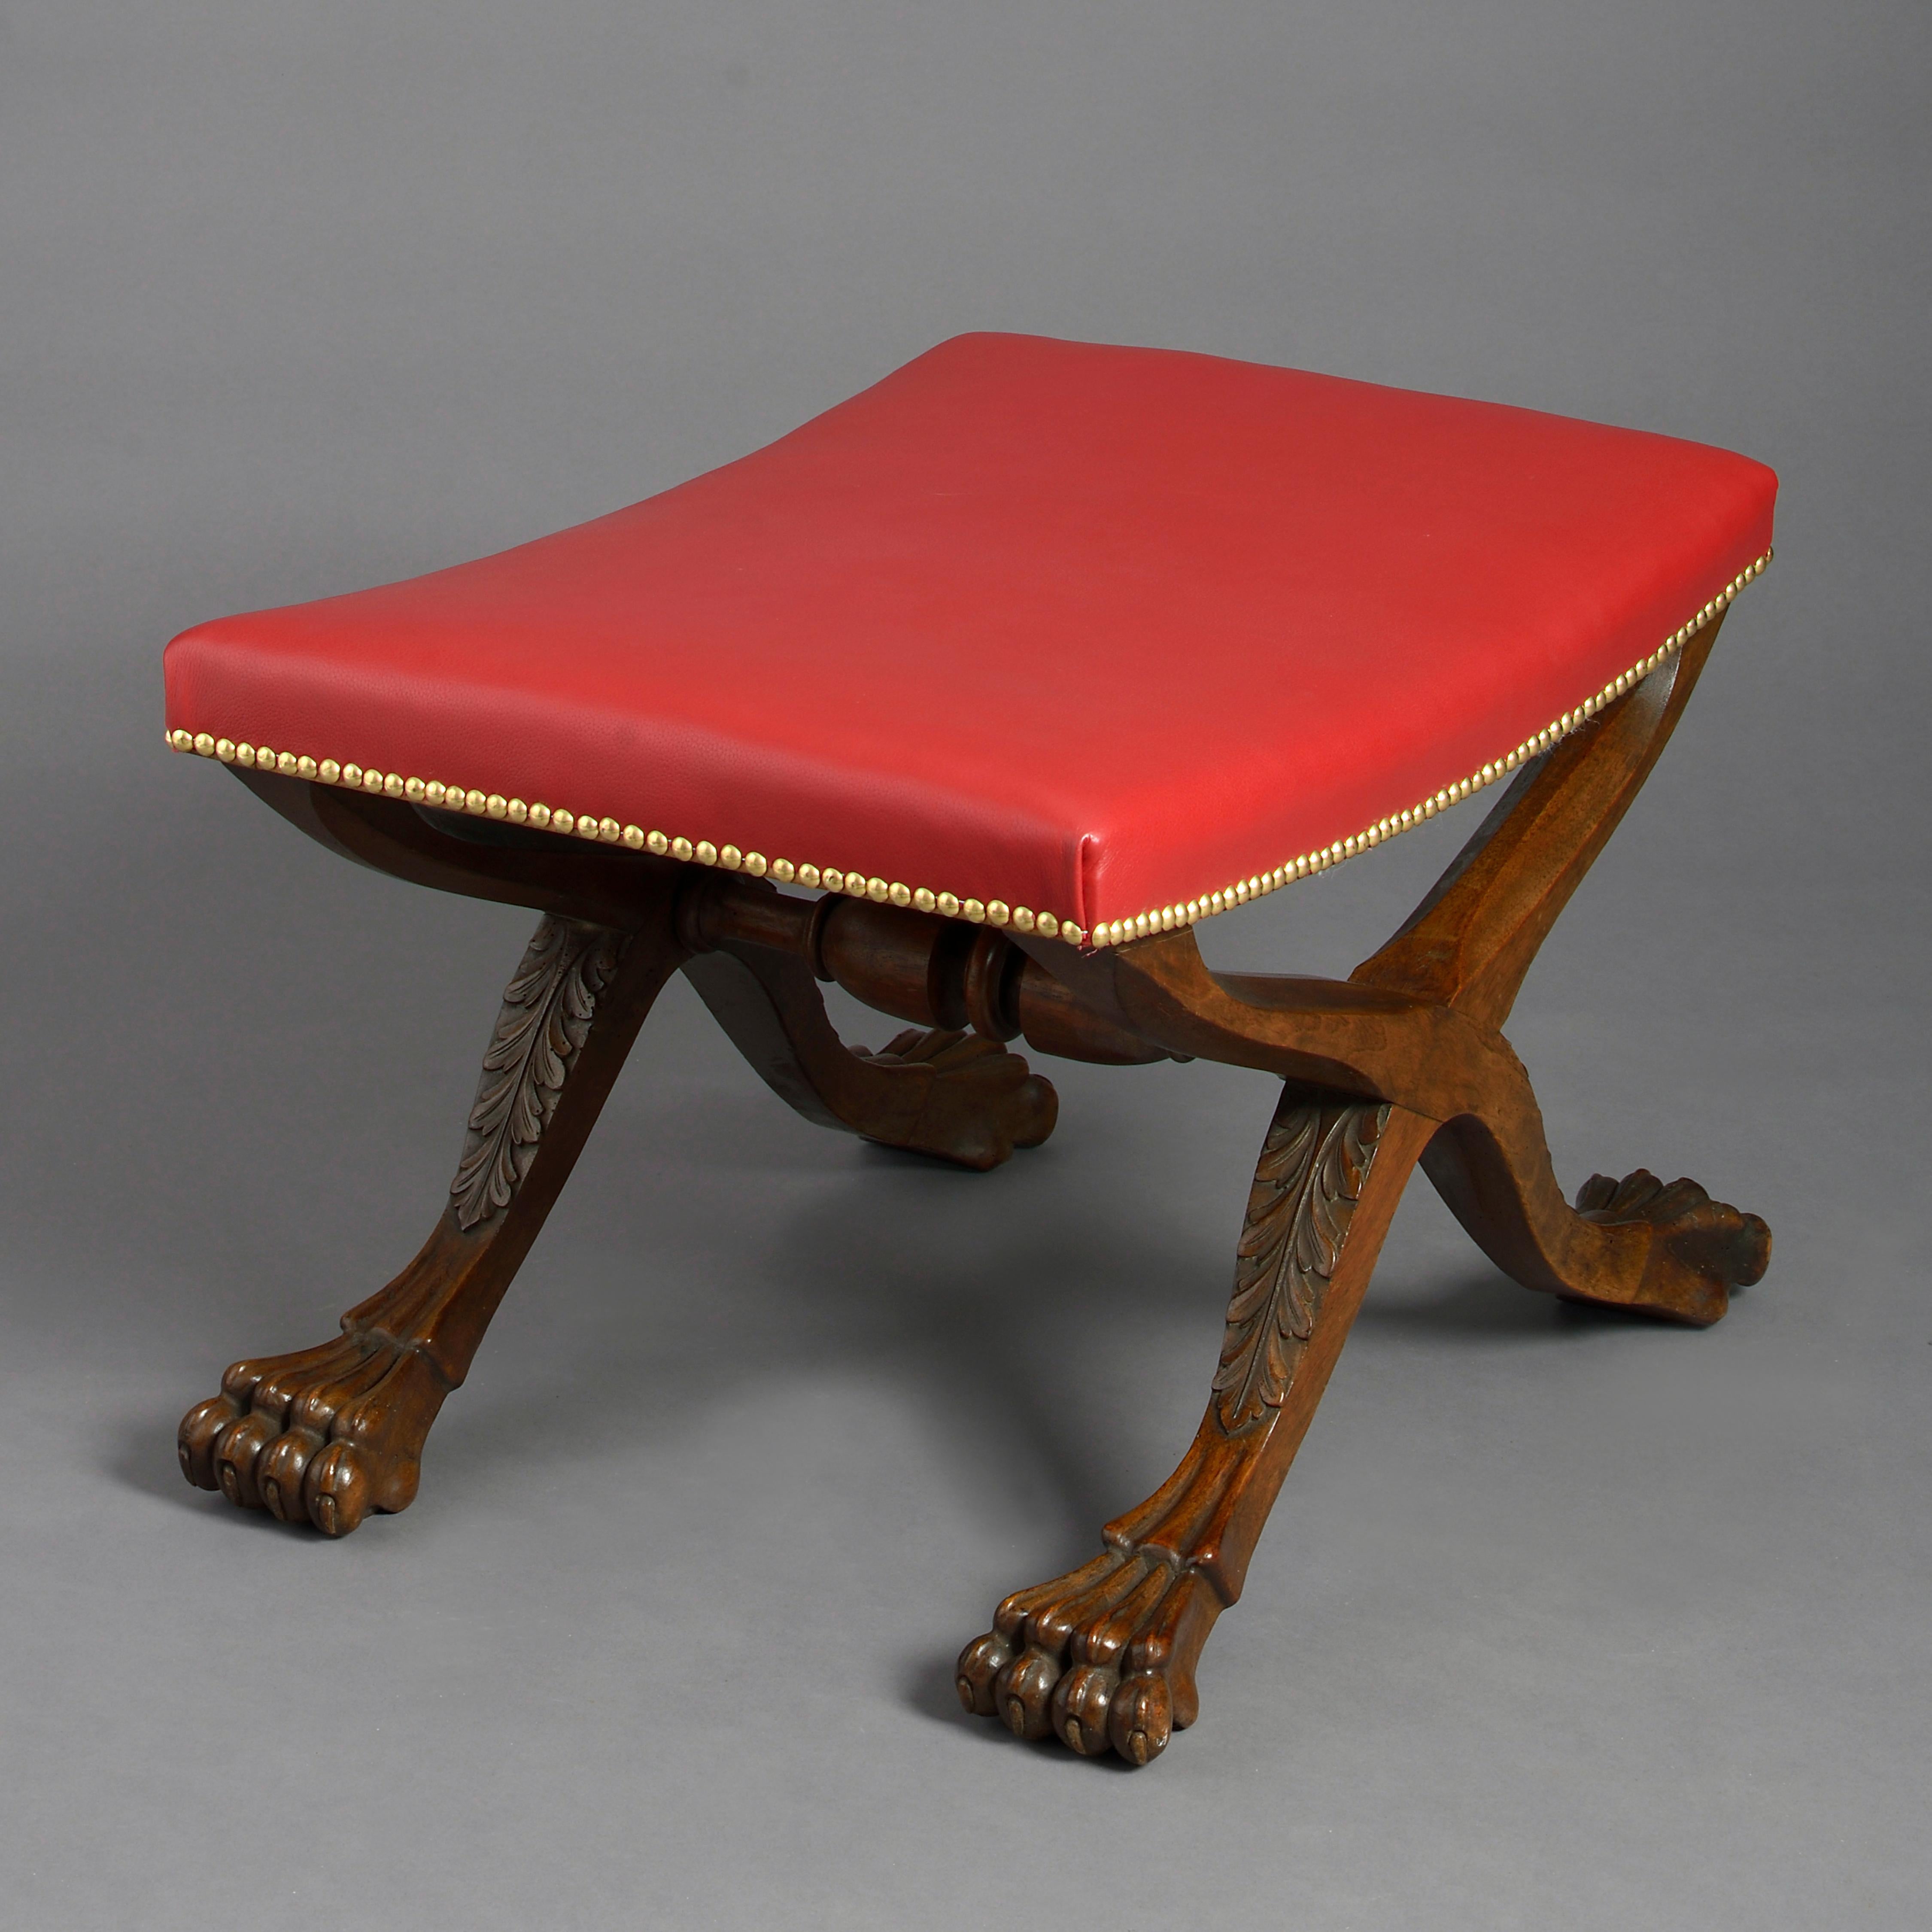 Victorian 19th Century Carved Walnut X-Frame Stool with Red Leather Seat